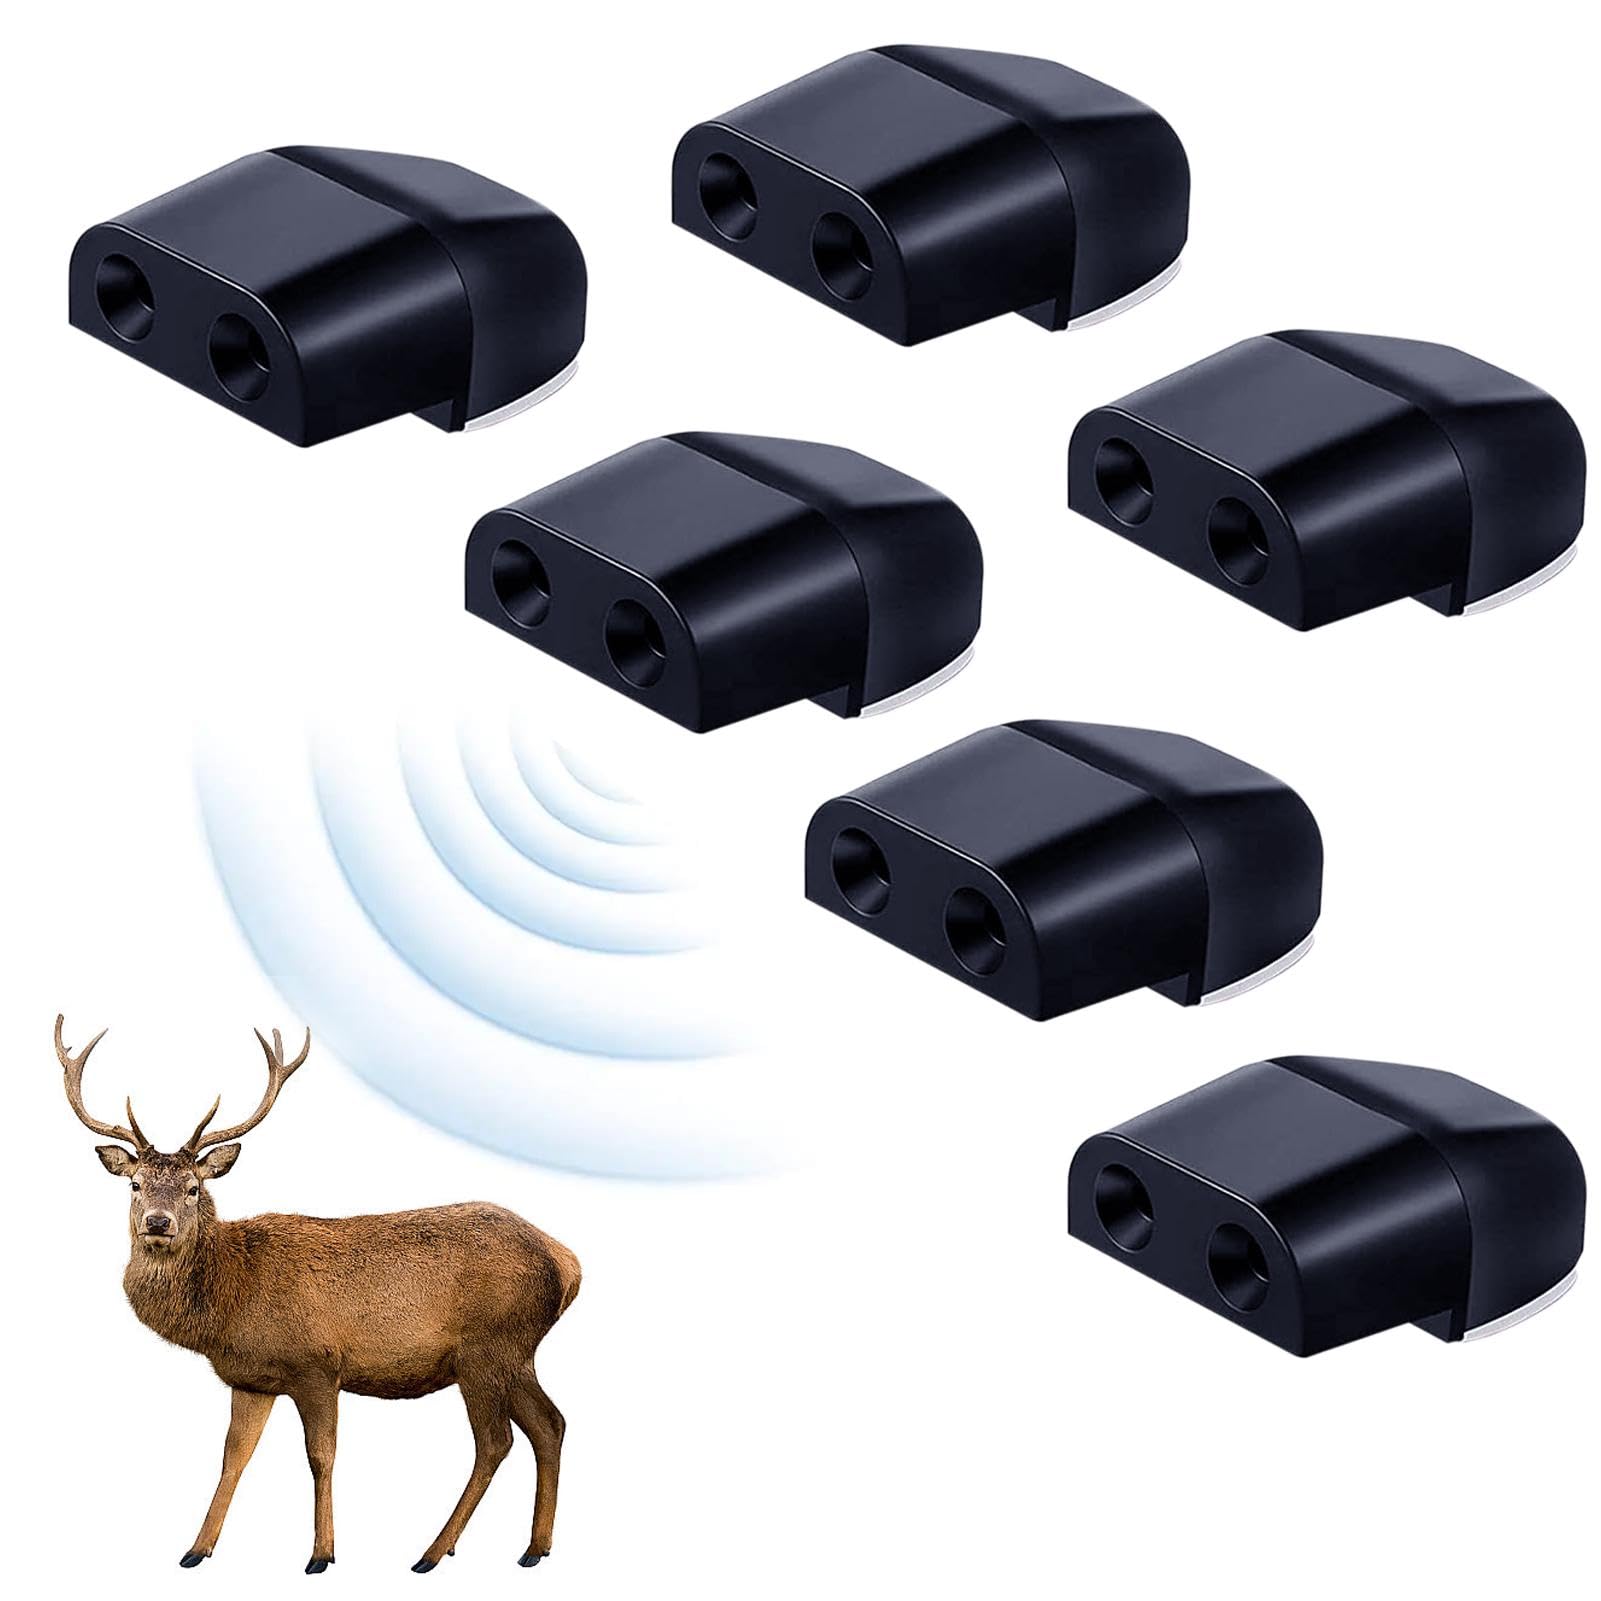 OTAIVE Pack of 6 Deer Whistle Warning, Vehicle Deer Whistles,Car Deer Warning Whistles,Alarm for Deer Whistles, Alarm for Animals,Wildlife Alarm Ultrasonic Whistle,for Cars, Motorcycles von OTAIVE